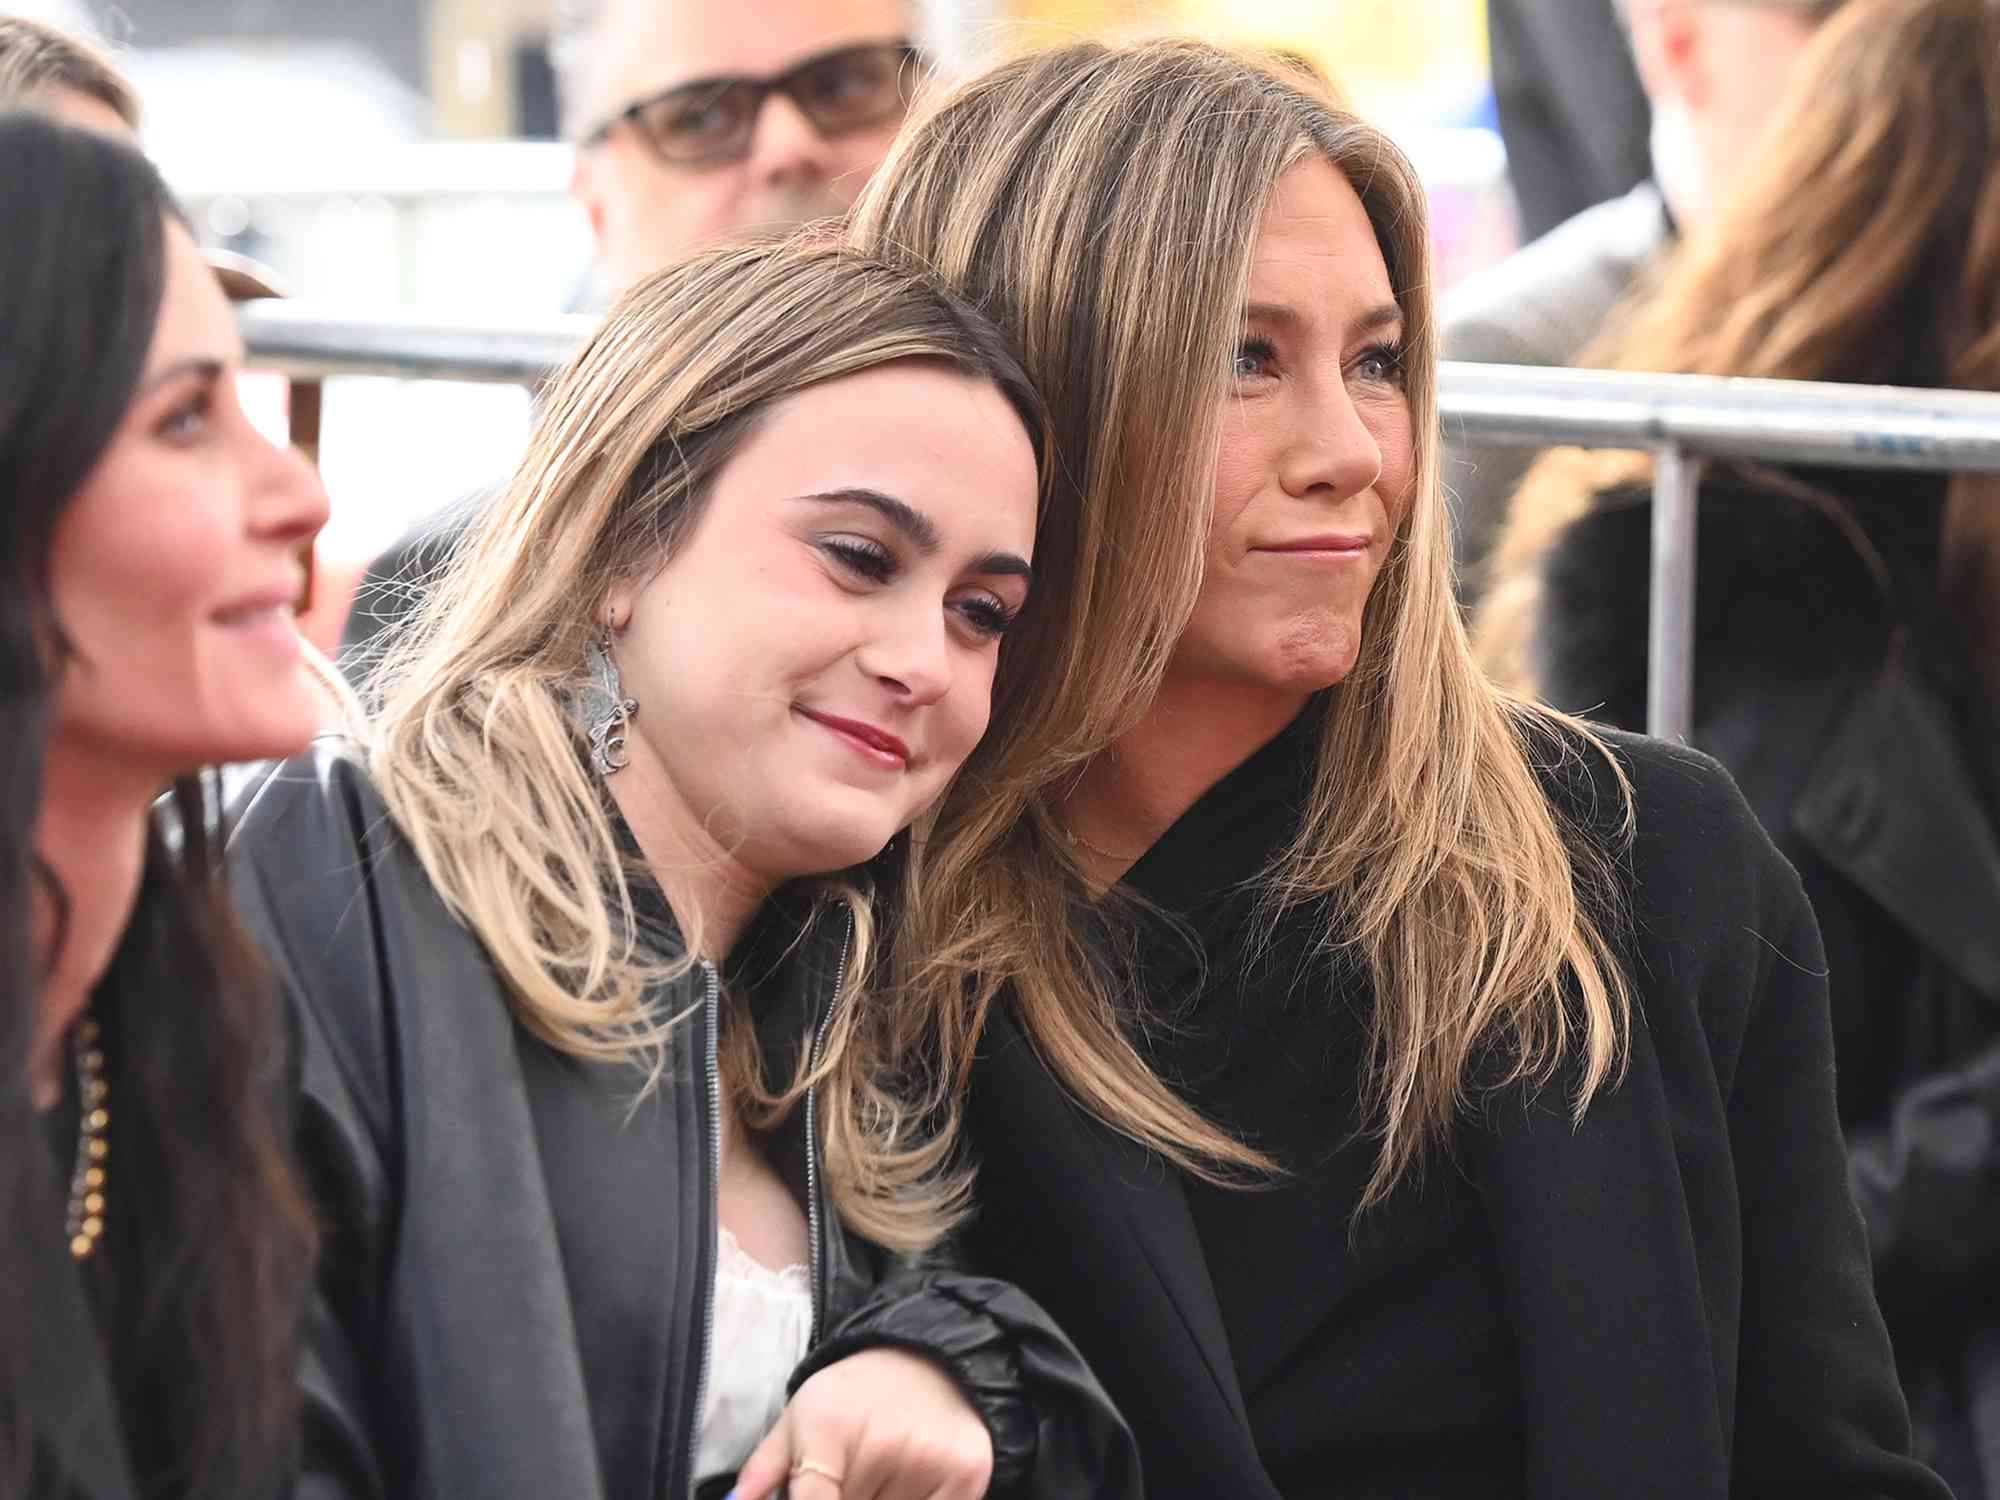 Coco Arquette and Jennifer Aniston at the star ceremony where Courteney Cox is honored with a star on the Hollywood Walk of Fame on February 27, 2023 in Los Angeles, California